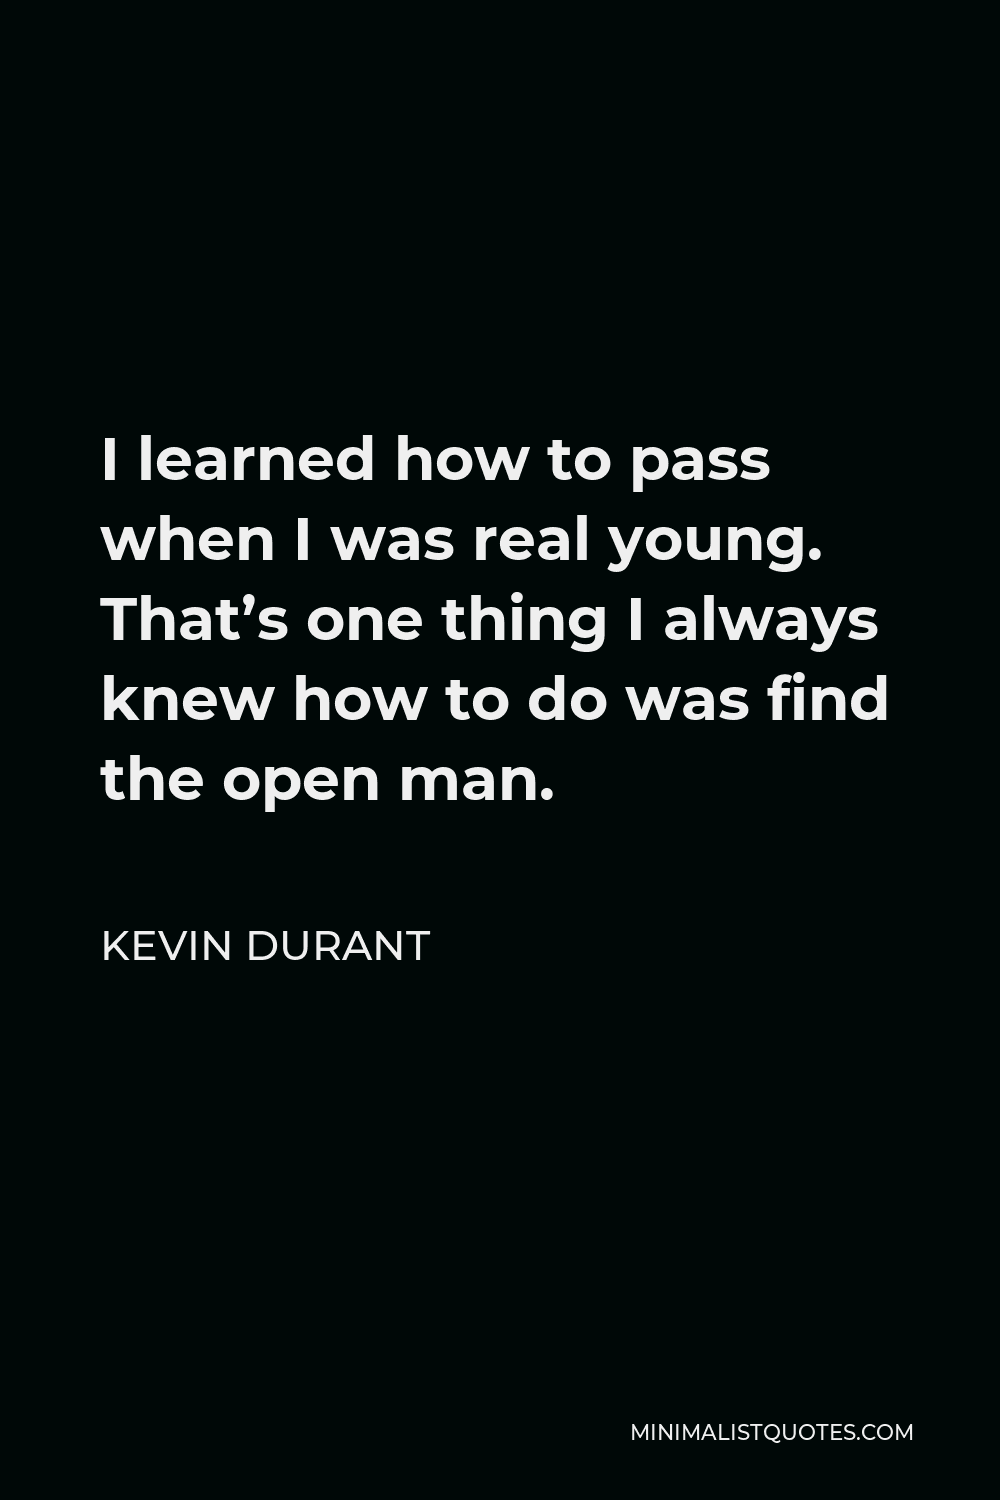 Kevin Durant Quote - I learned how to pass when I was real young. That’s one thing I always knew how to do was find the open man.